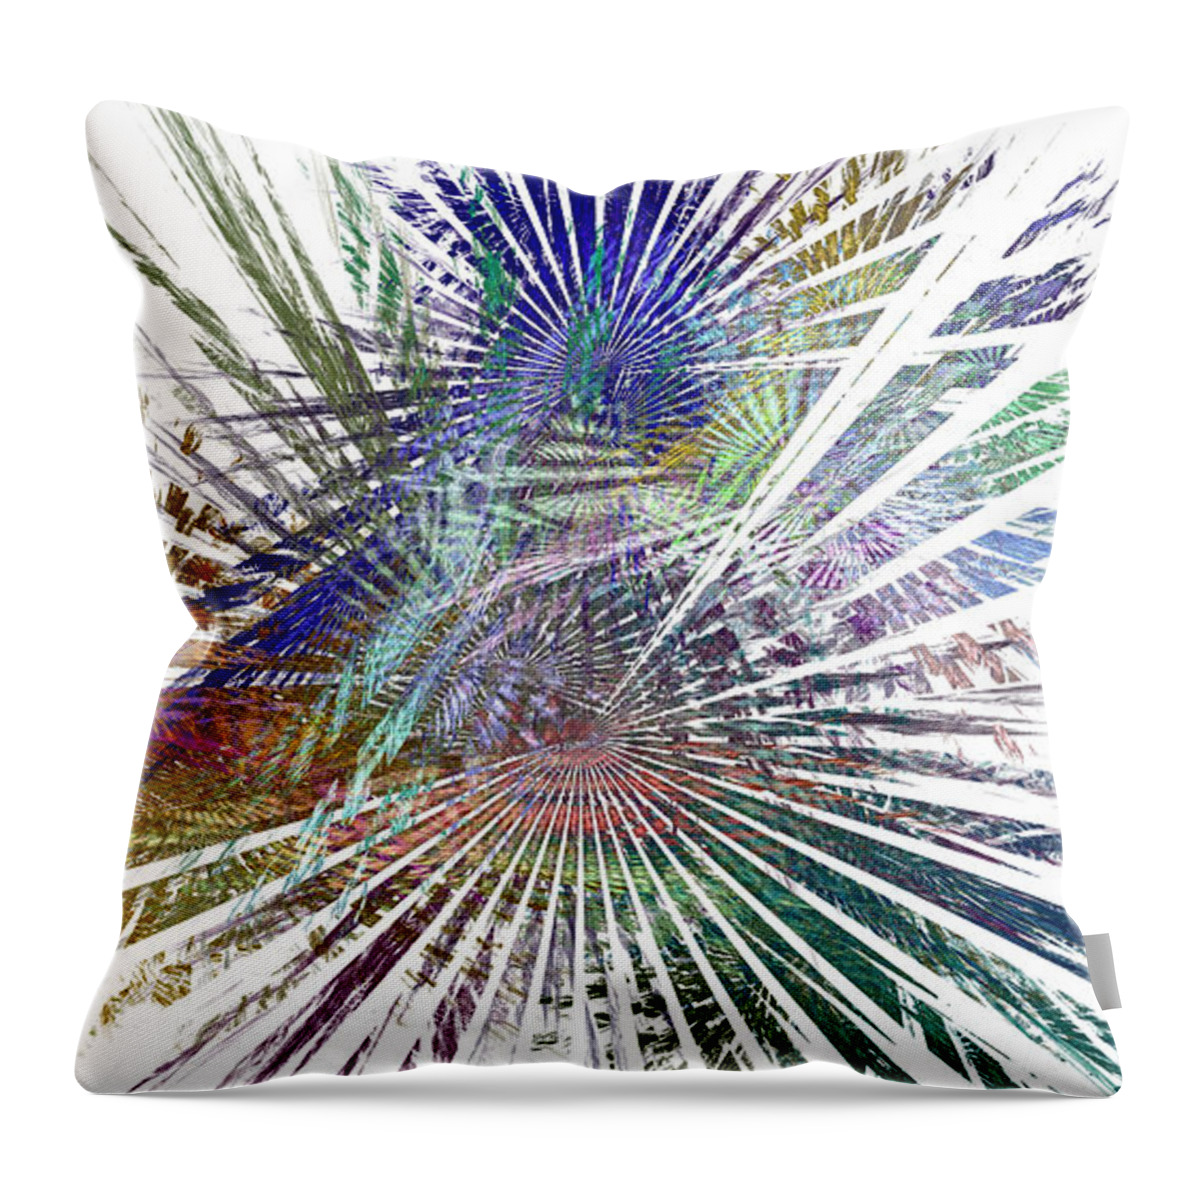 Fractal Throw Pillow featuring the digital art Fractura Colora on White by Richard Ortolano